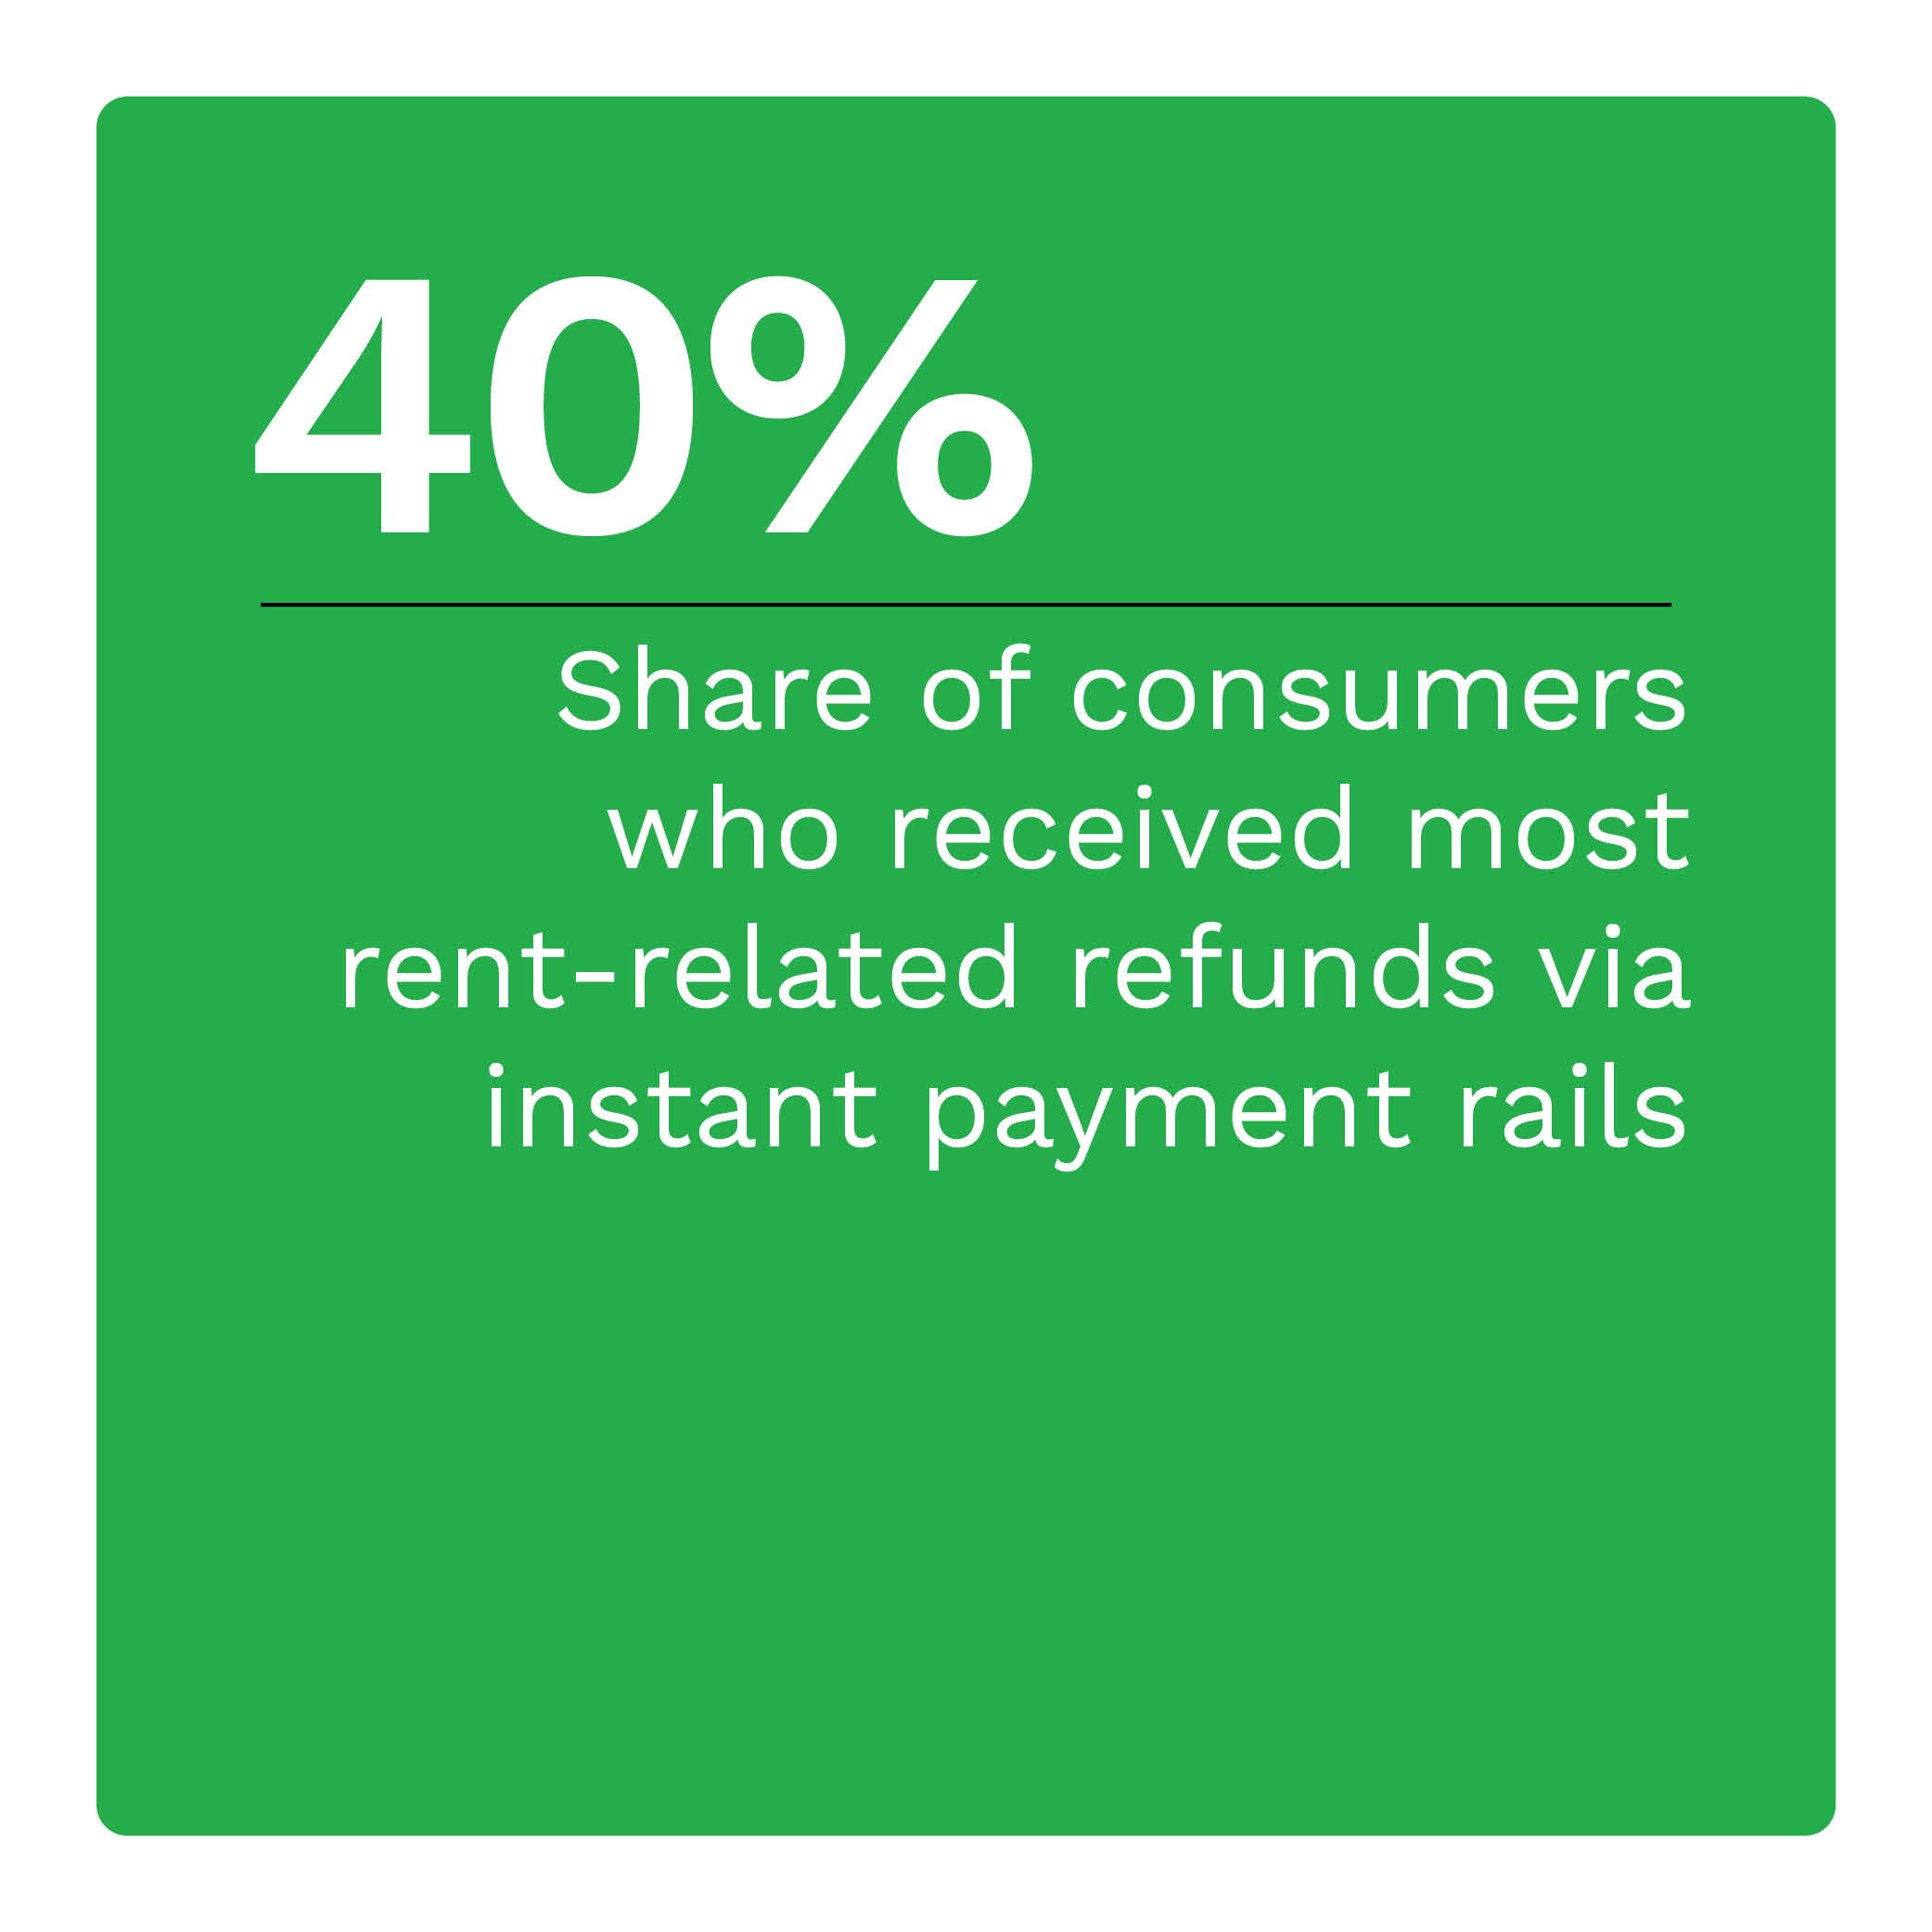 40%: Share of consumers who received most rent-related refunds via instant payment rails